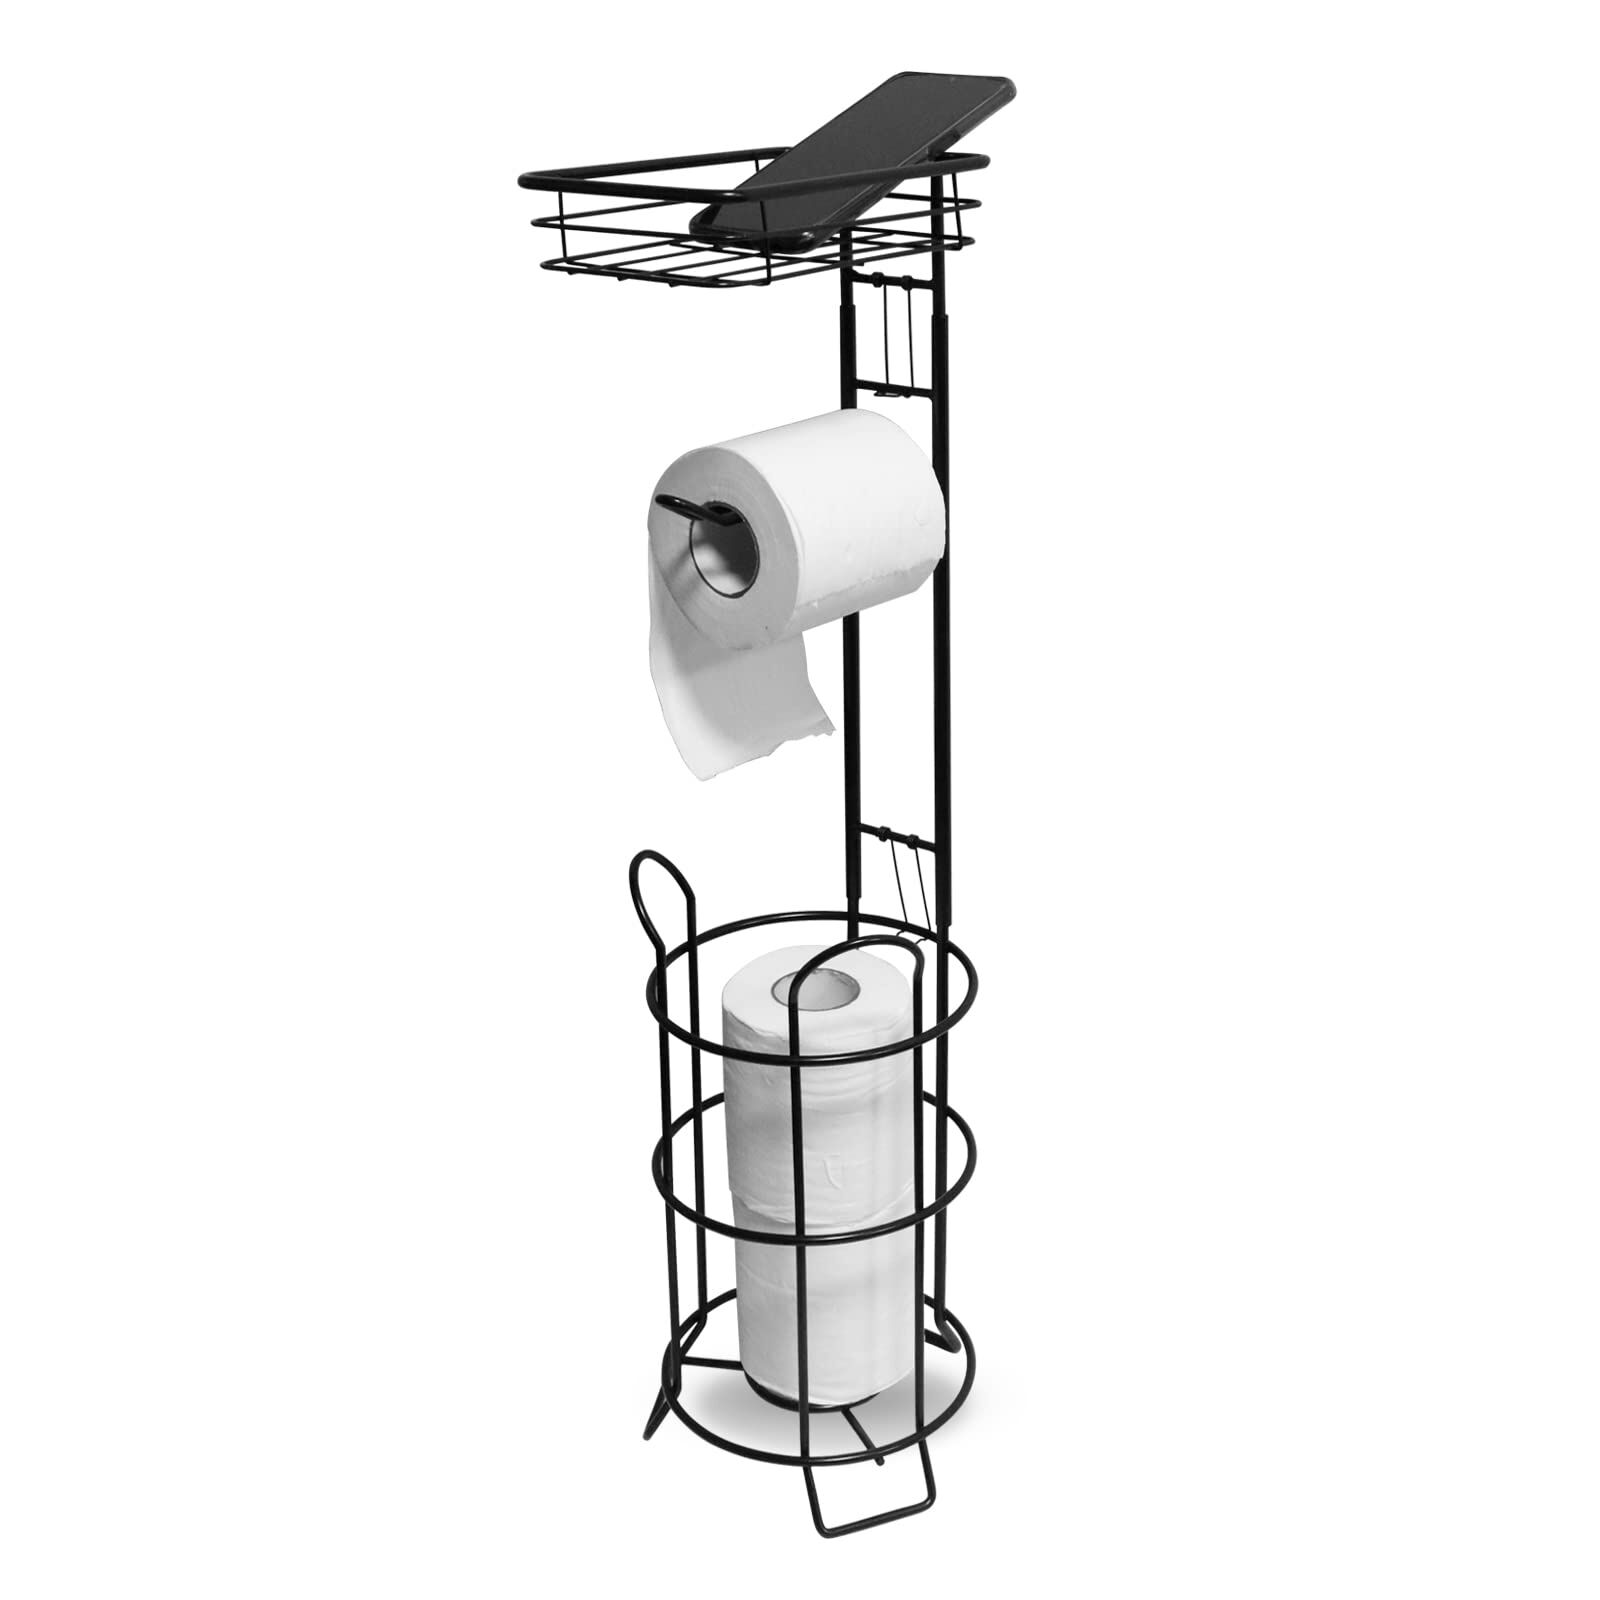 Upgraded Toilet Paper Holder Stand for Bathroom, Holds 3 Big Rolls of Jumbo  Mega Paper, Top Shelf for Wipes Tissue, Sturdy Freestanding Paper Roll